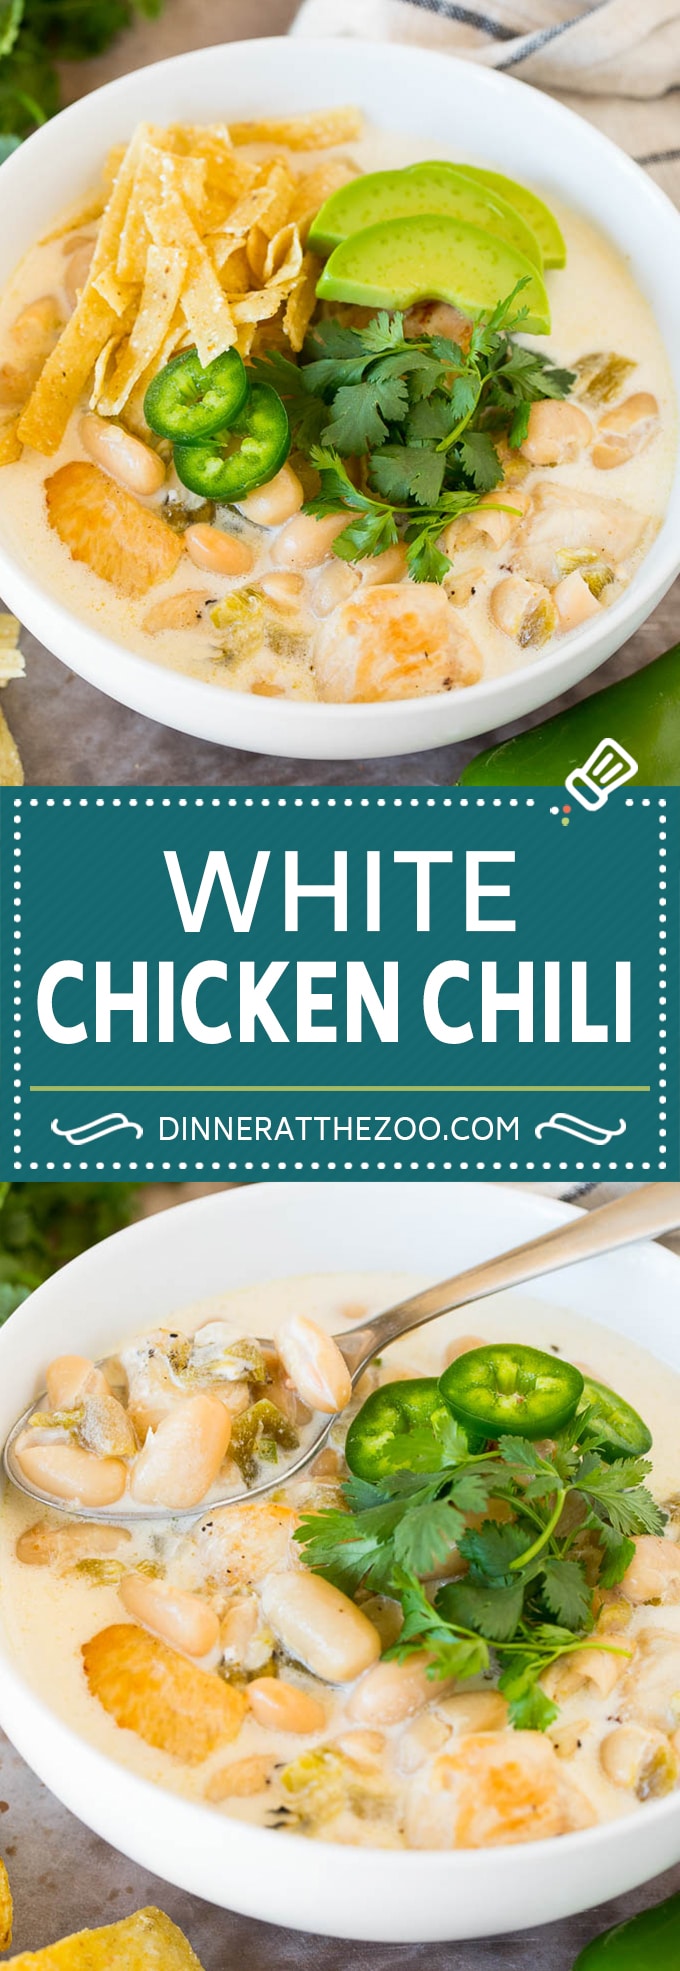 This white chicken chili is a creamy blend of chicken, chilies, beans and spices, all simmered together.